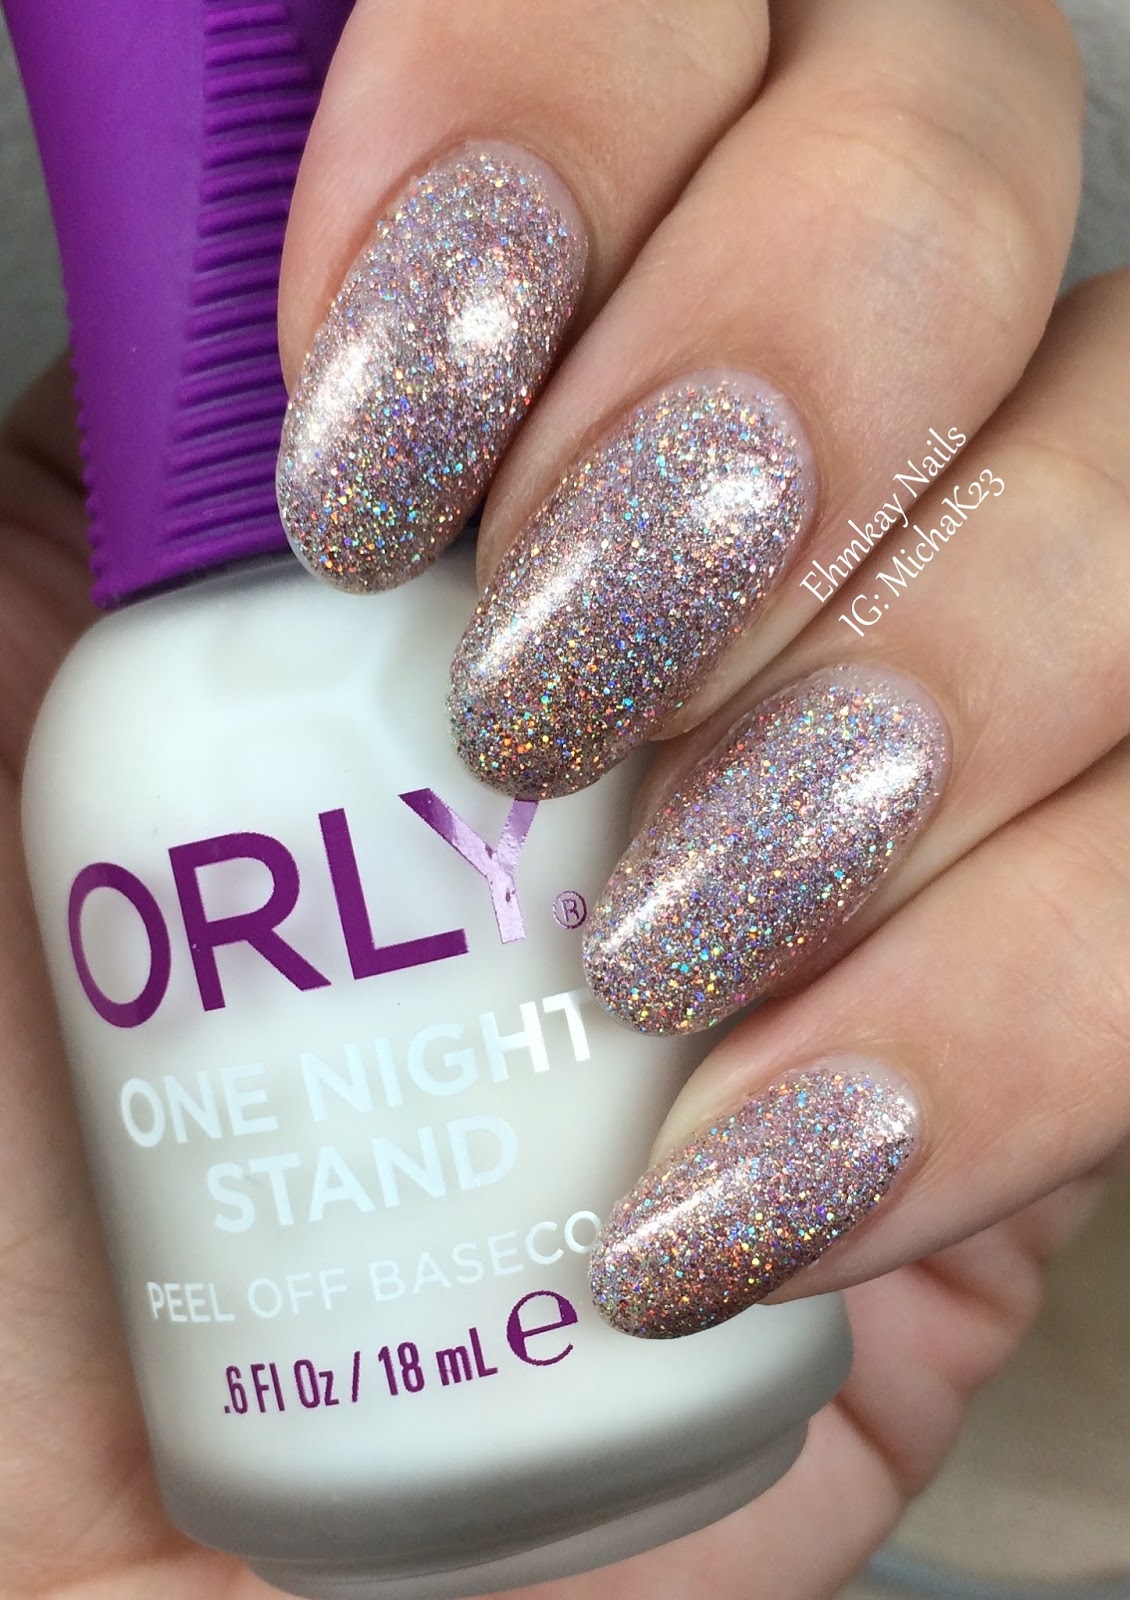 ehmkay nails: ORLY One Nail Stand Peel Off Base Coat Wear Test and Review